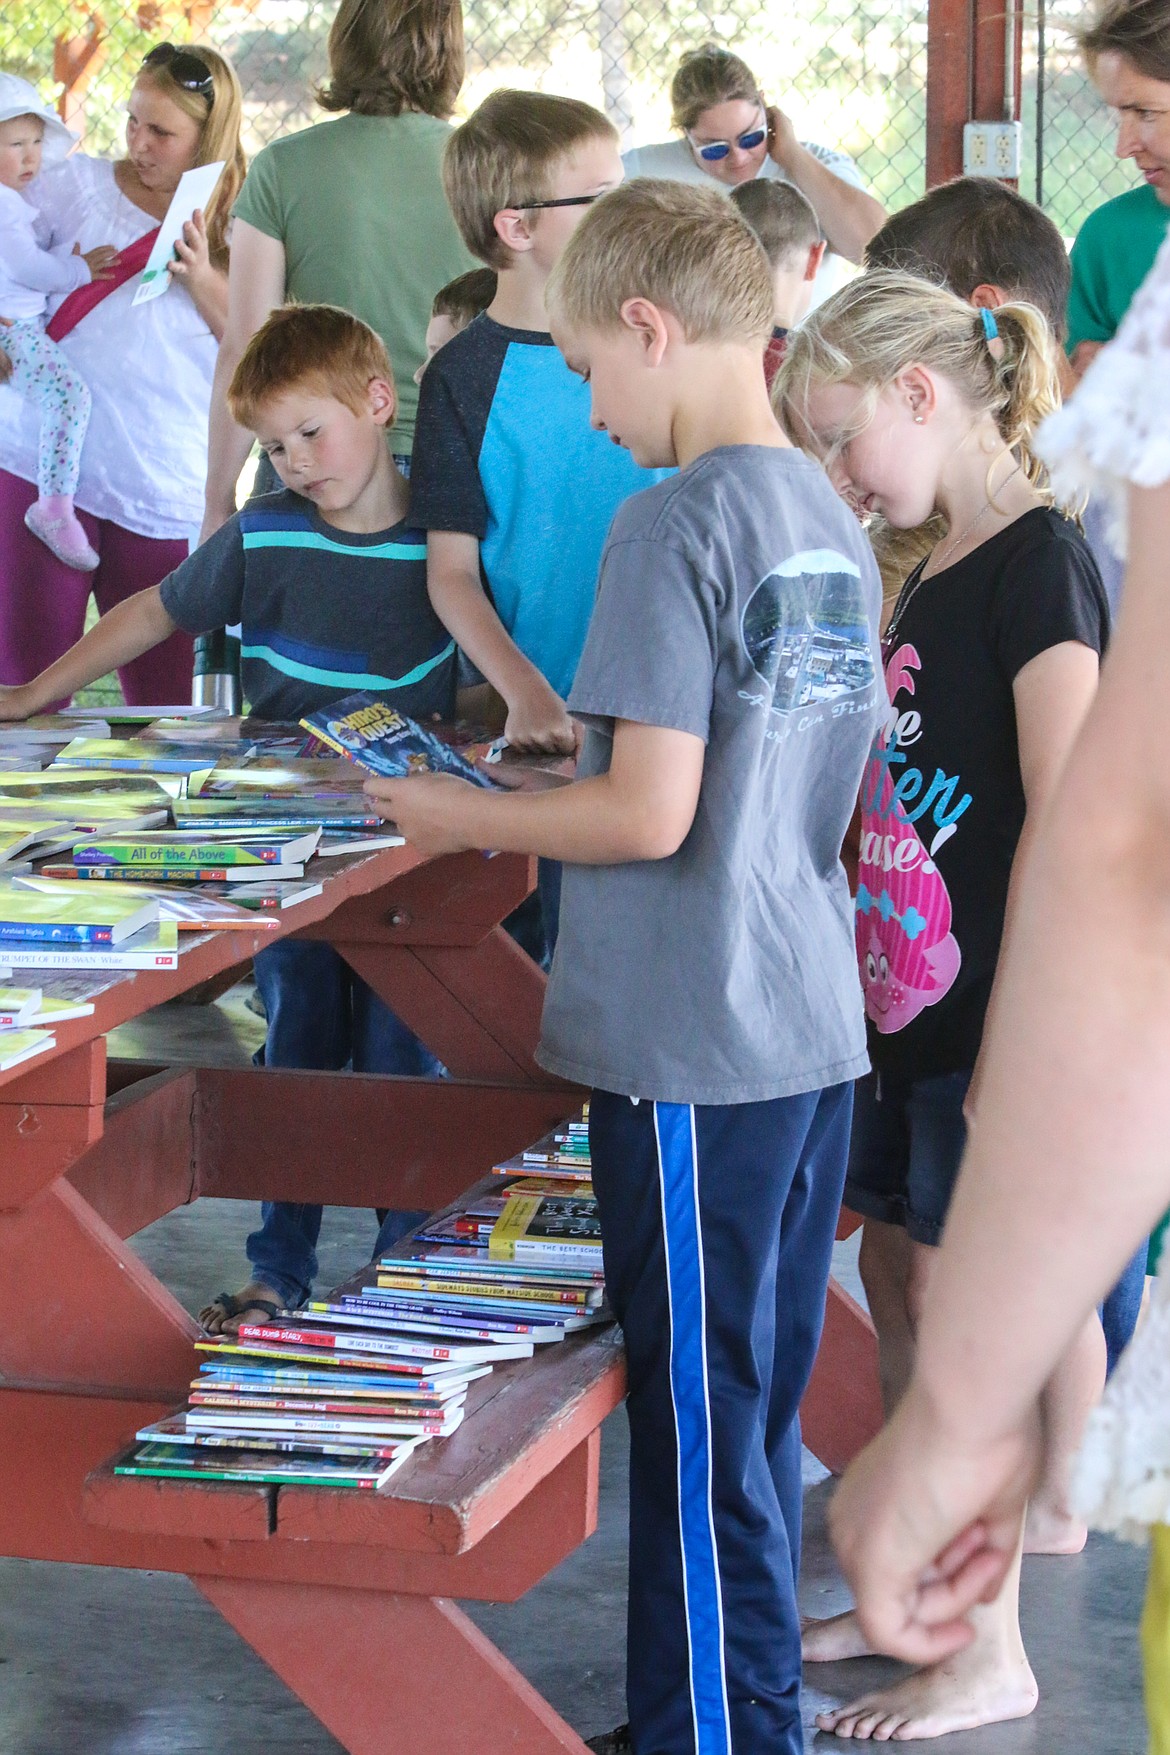 Photo by MANDI BATEMAN
There were books for all ages, displayed across picnic tables, for the children to choose from.